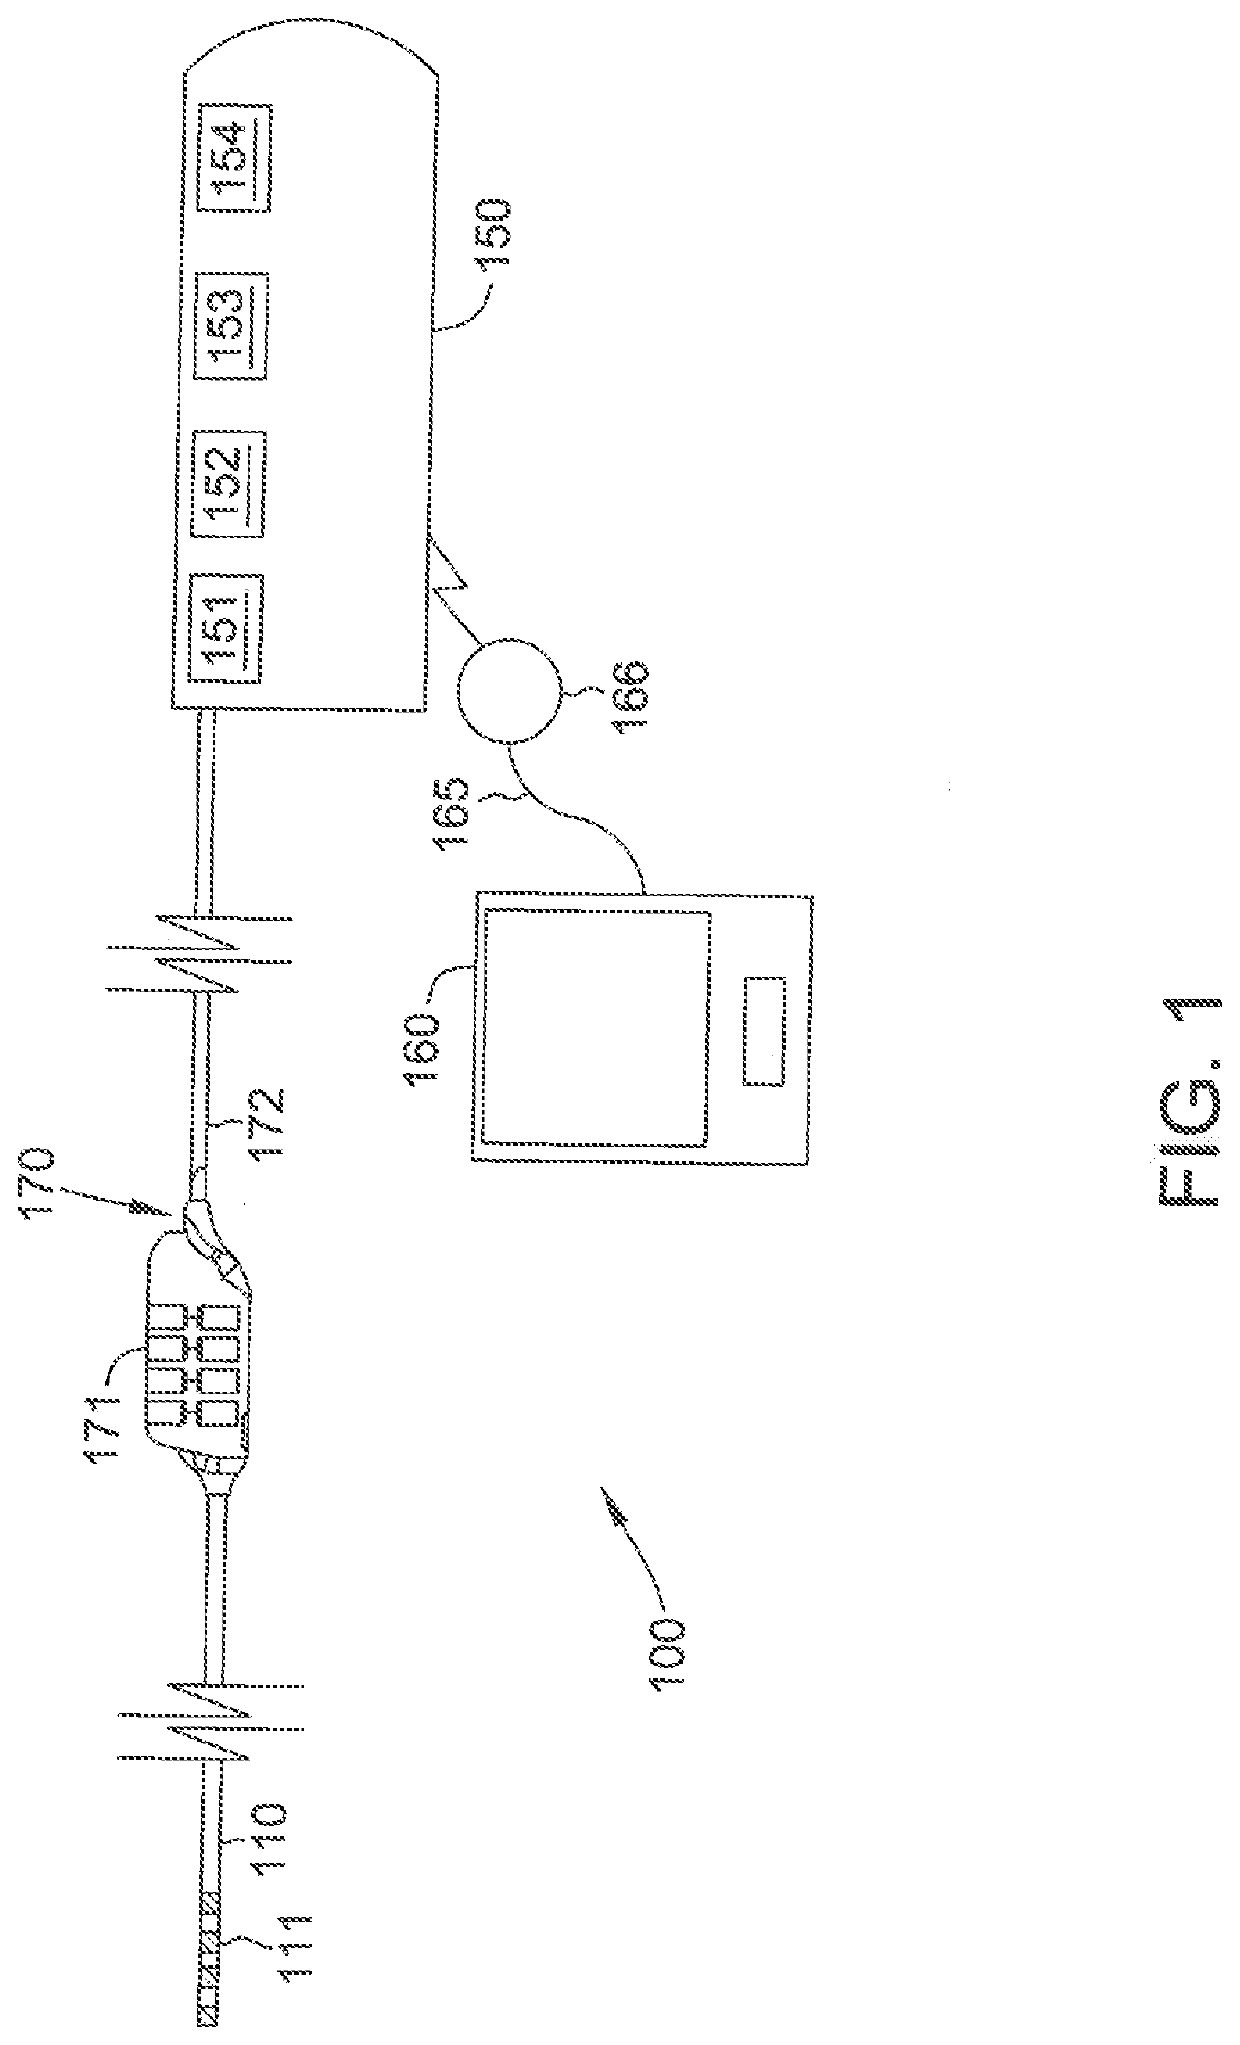 Systems and methods for output channel architectures in implantable pulse generators